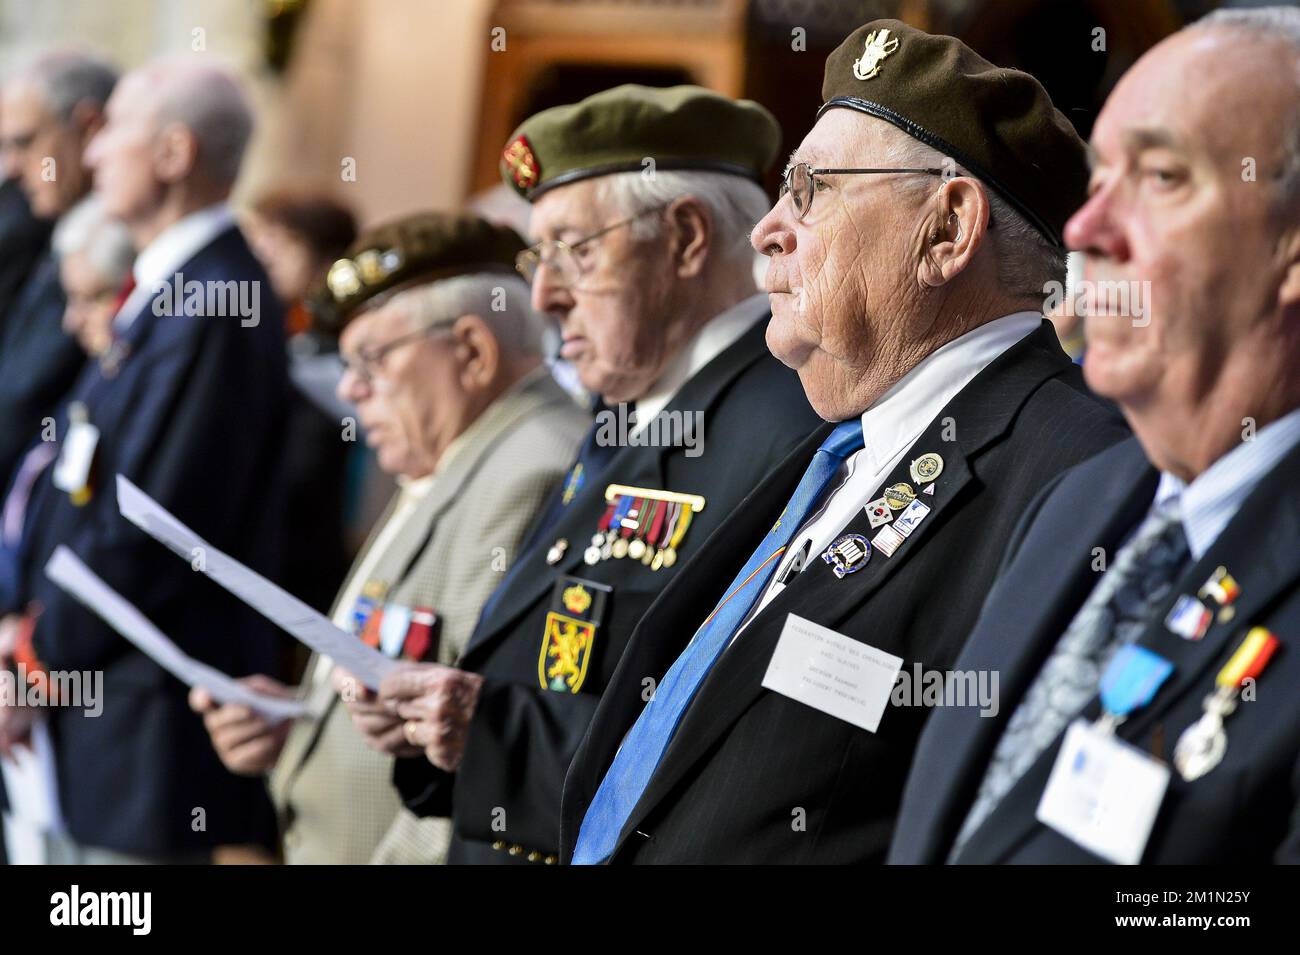 20120721 - LIEGE, BELGIUM: Illustration shows veterans during the Te Deum mass, on the occasion of today's Belgian National Day, at the Cathedrale Saint-Paul (Sint-Pauluskathedraal) cathedral, Saturday 21 July 2012 in Liege. BELGA PHOTO NICOLAS LAMBERT Stock Photo